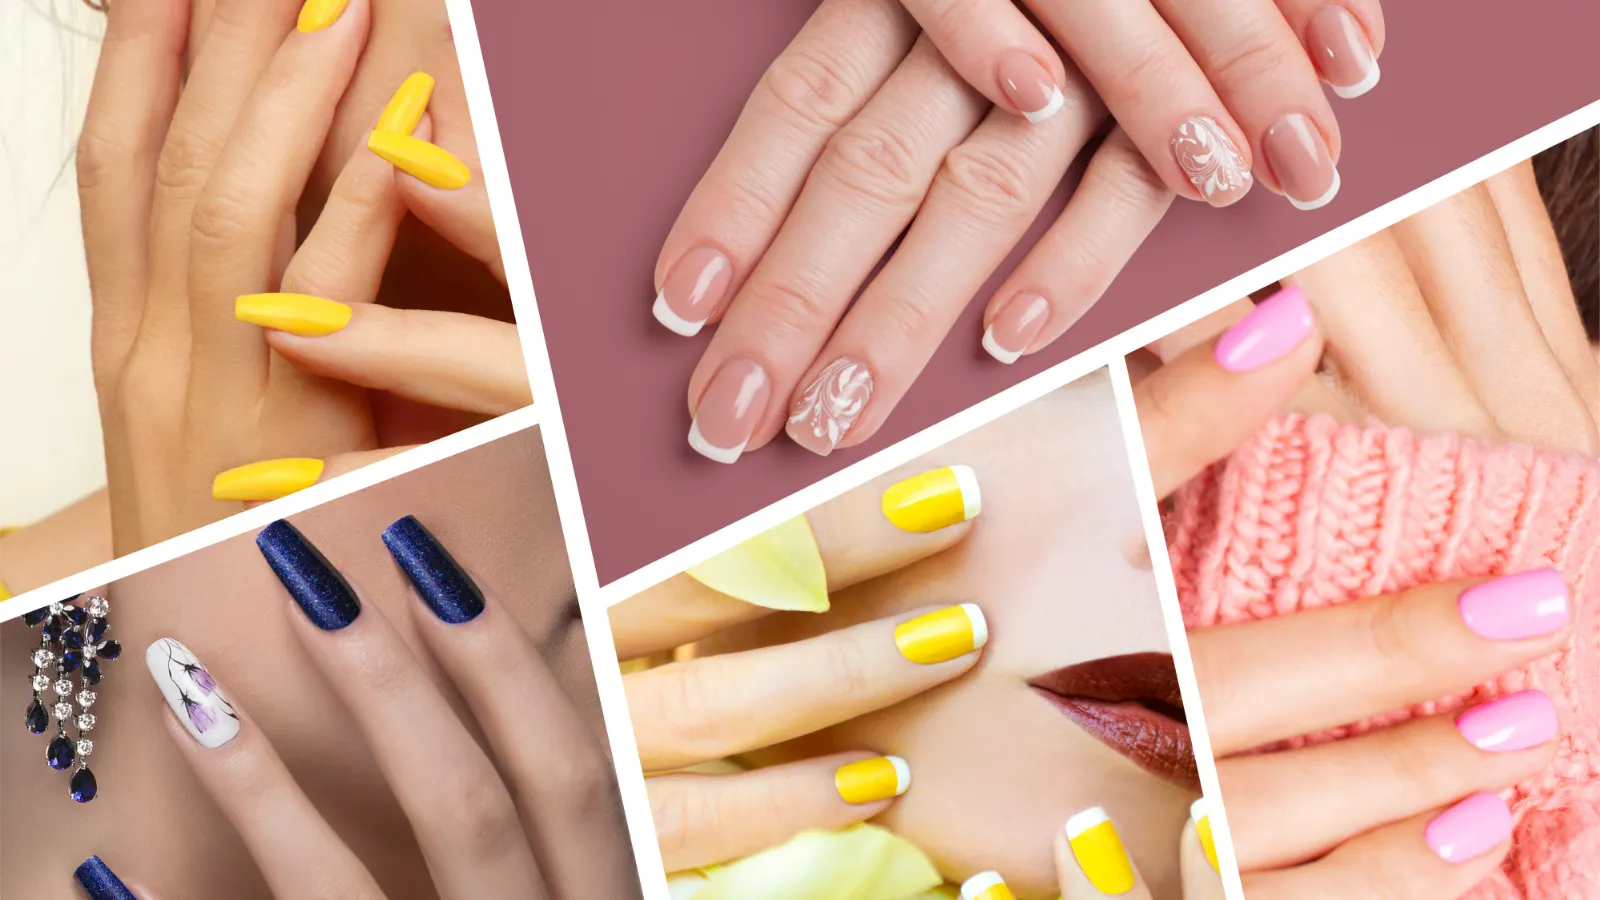 3. "Find Your Signature Nail Color Based on Your Zodiac Sign" - wide 4